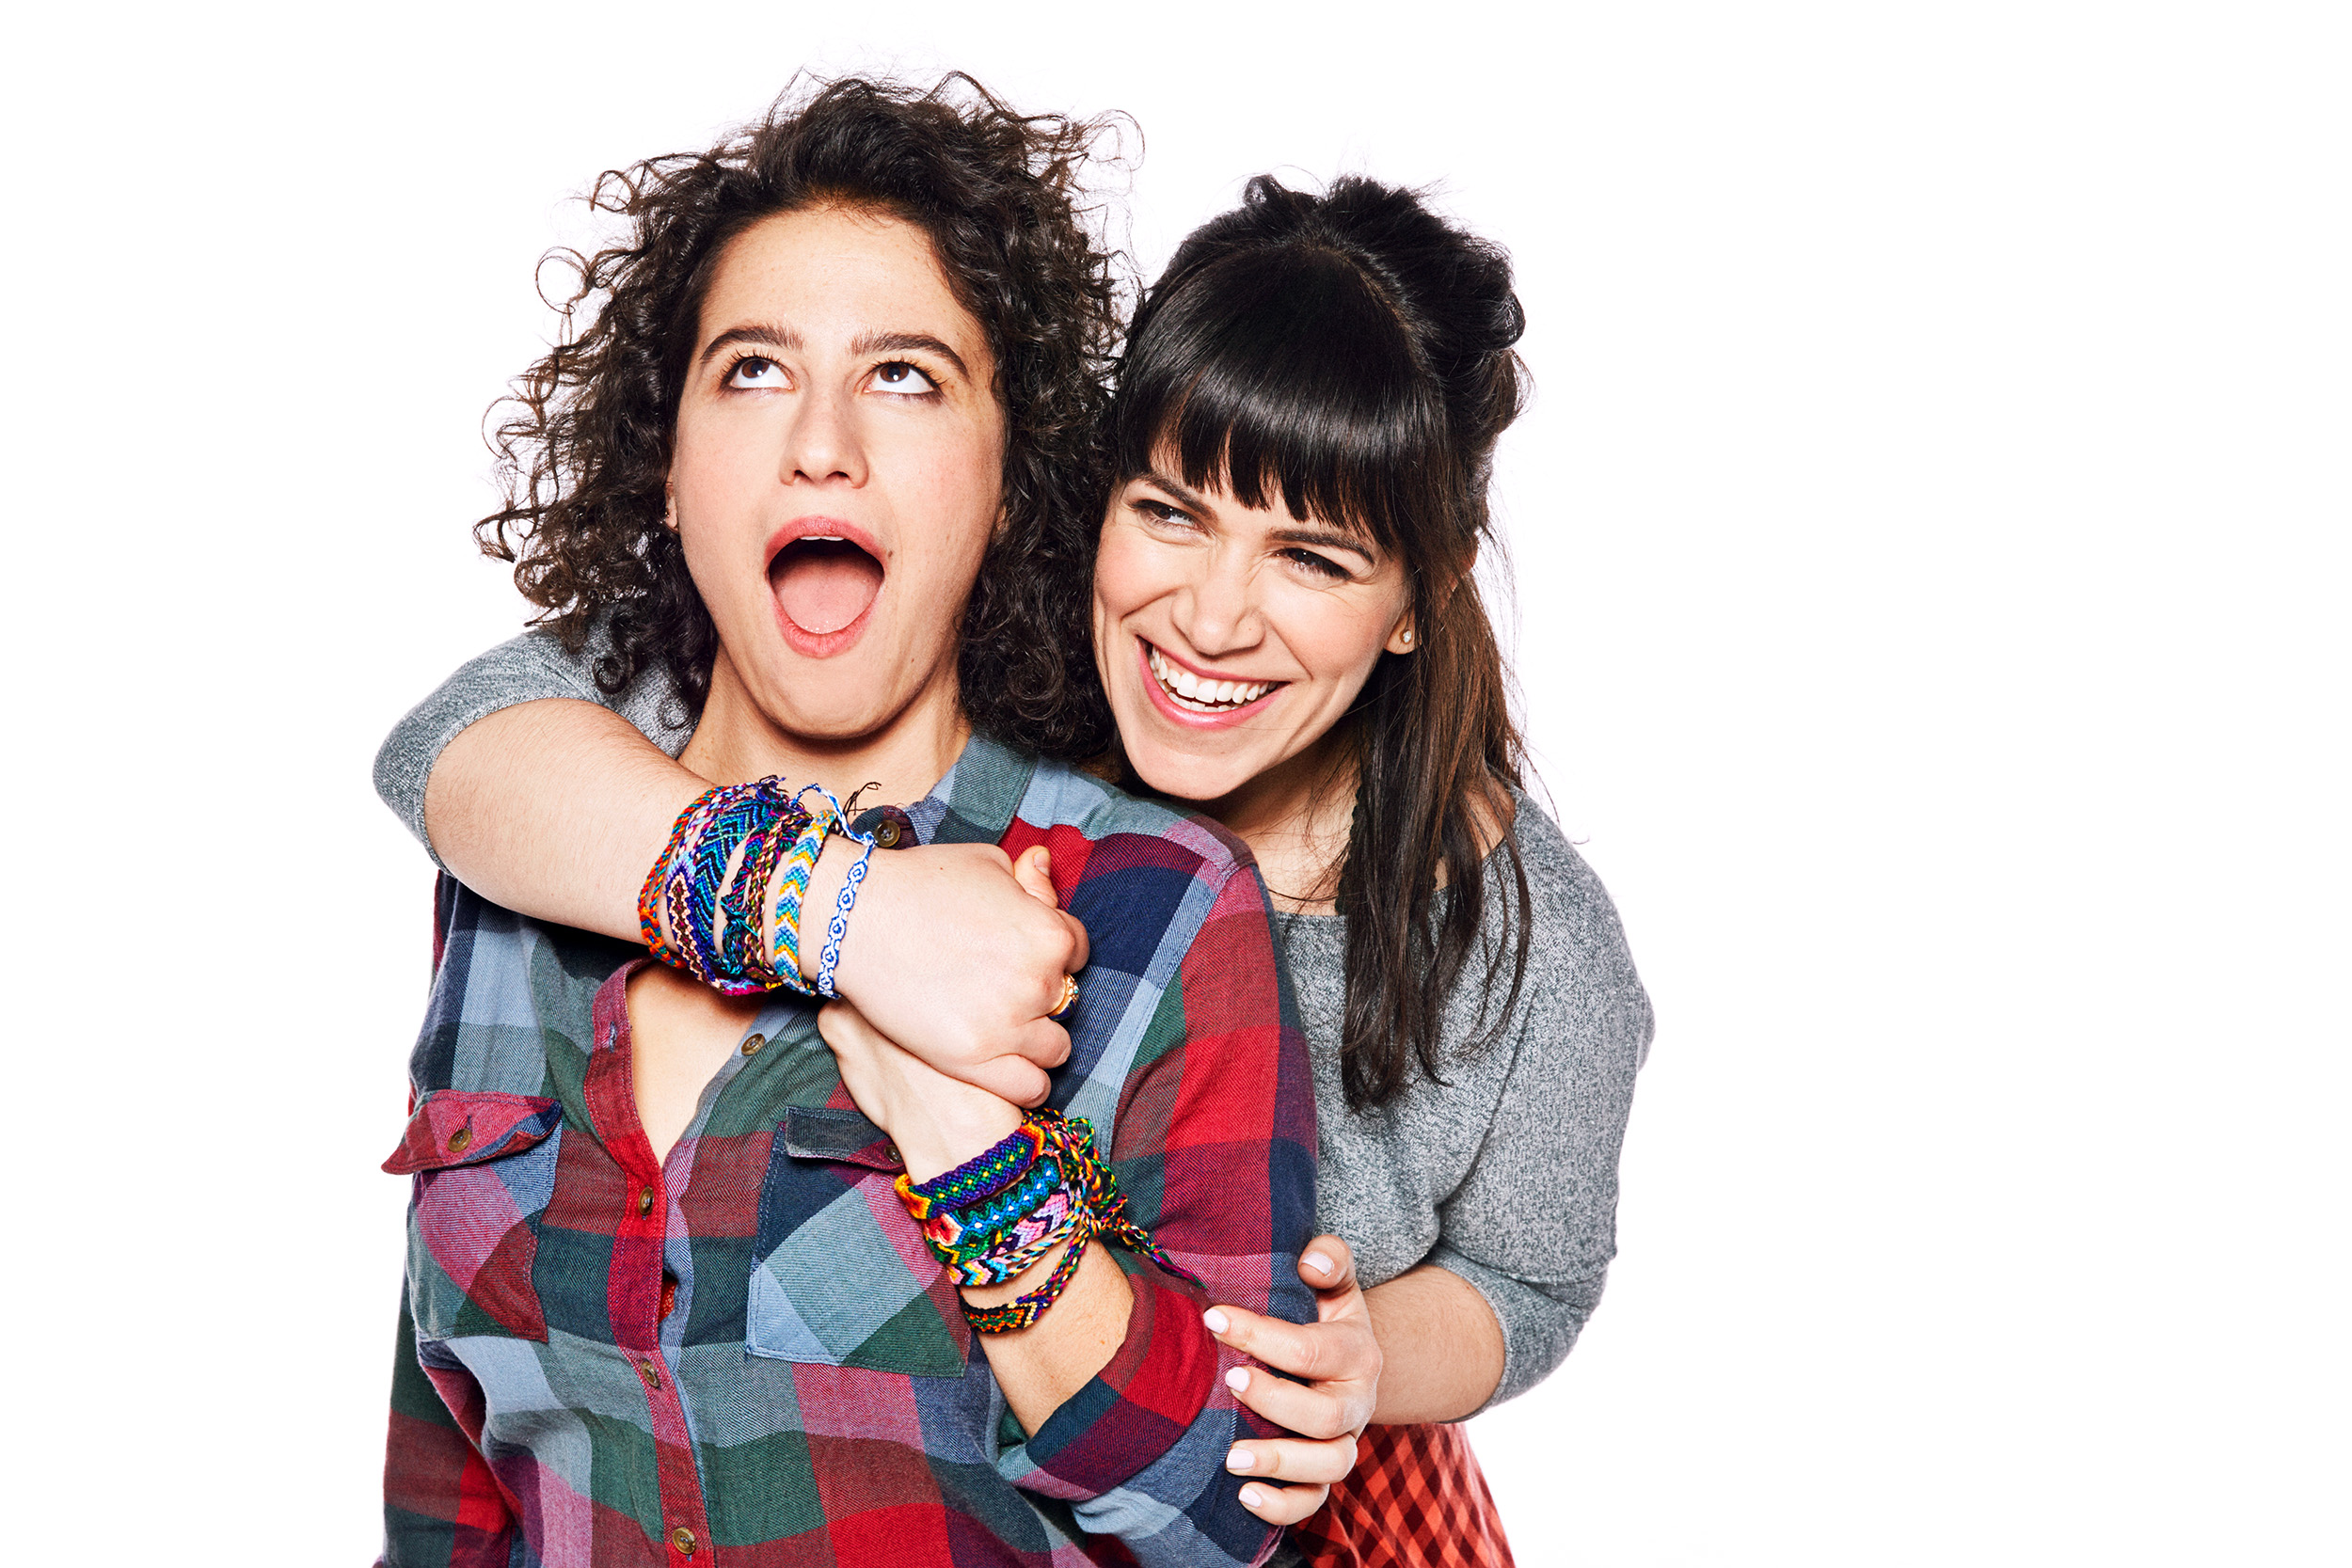  BROAD CITY | Comedy Central 